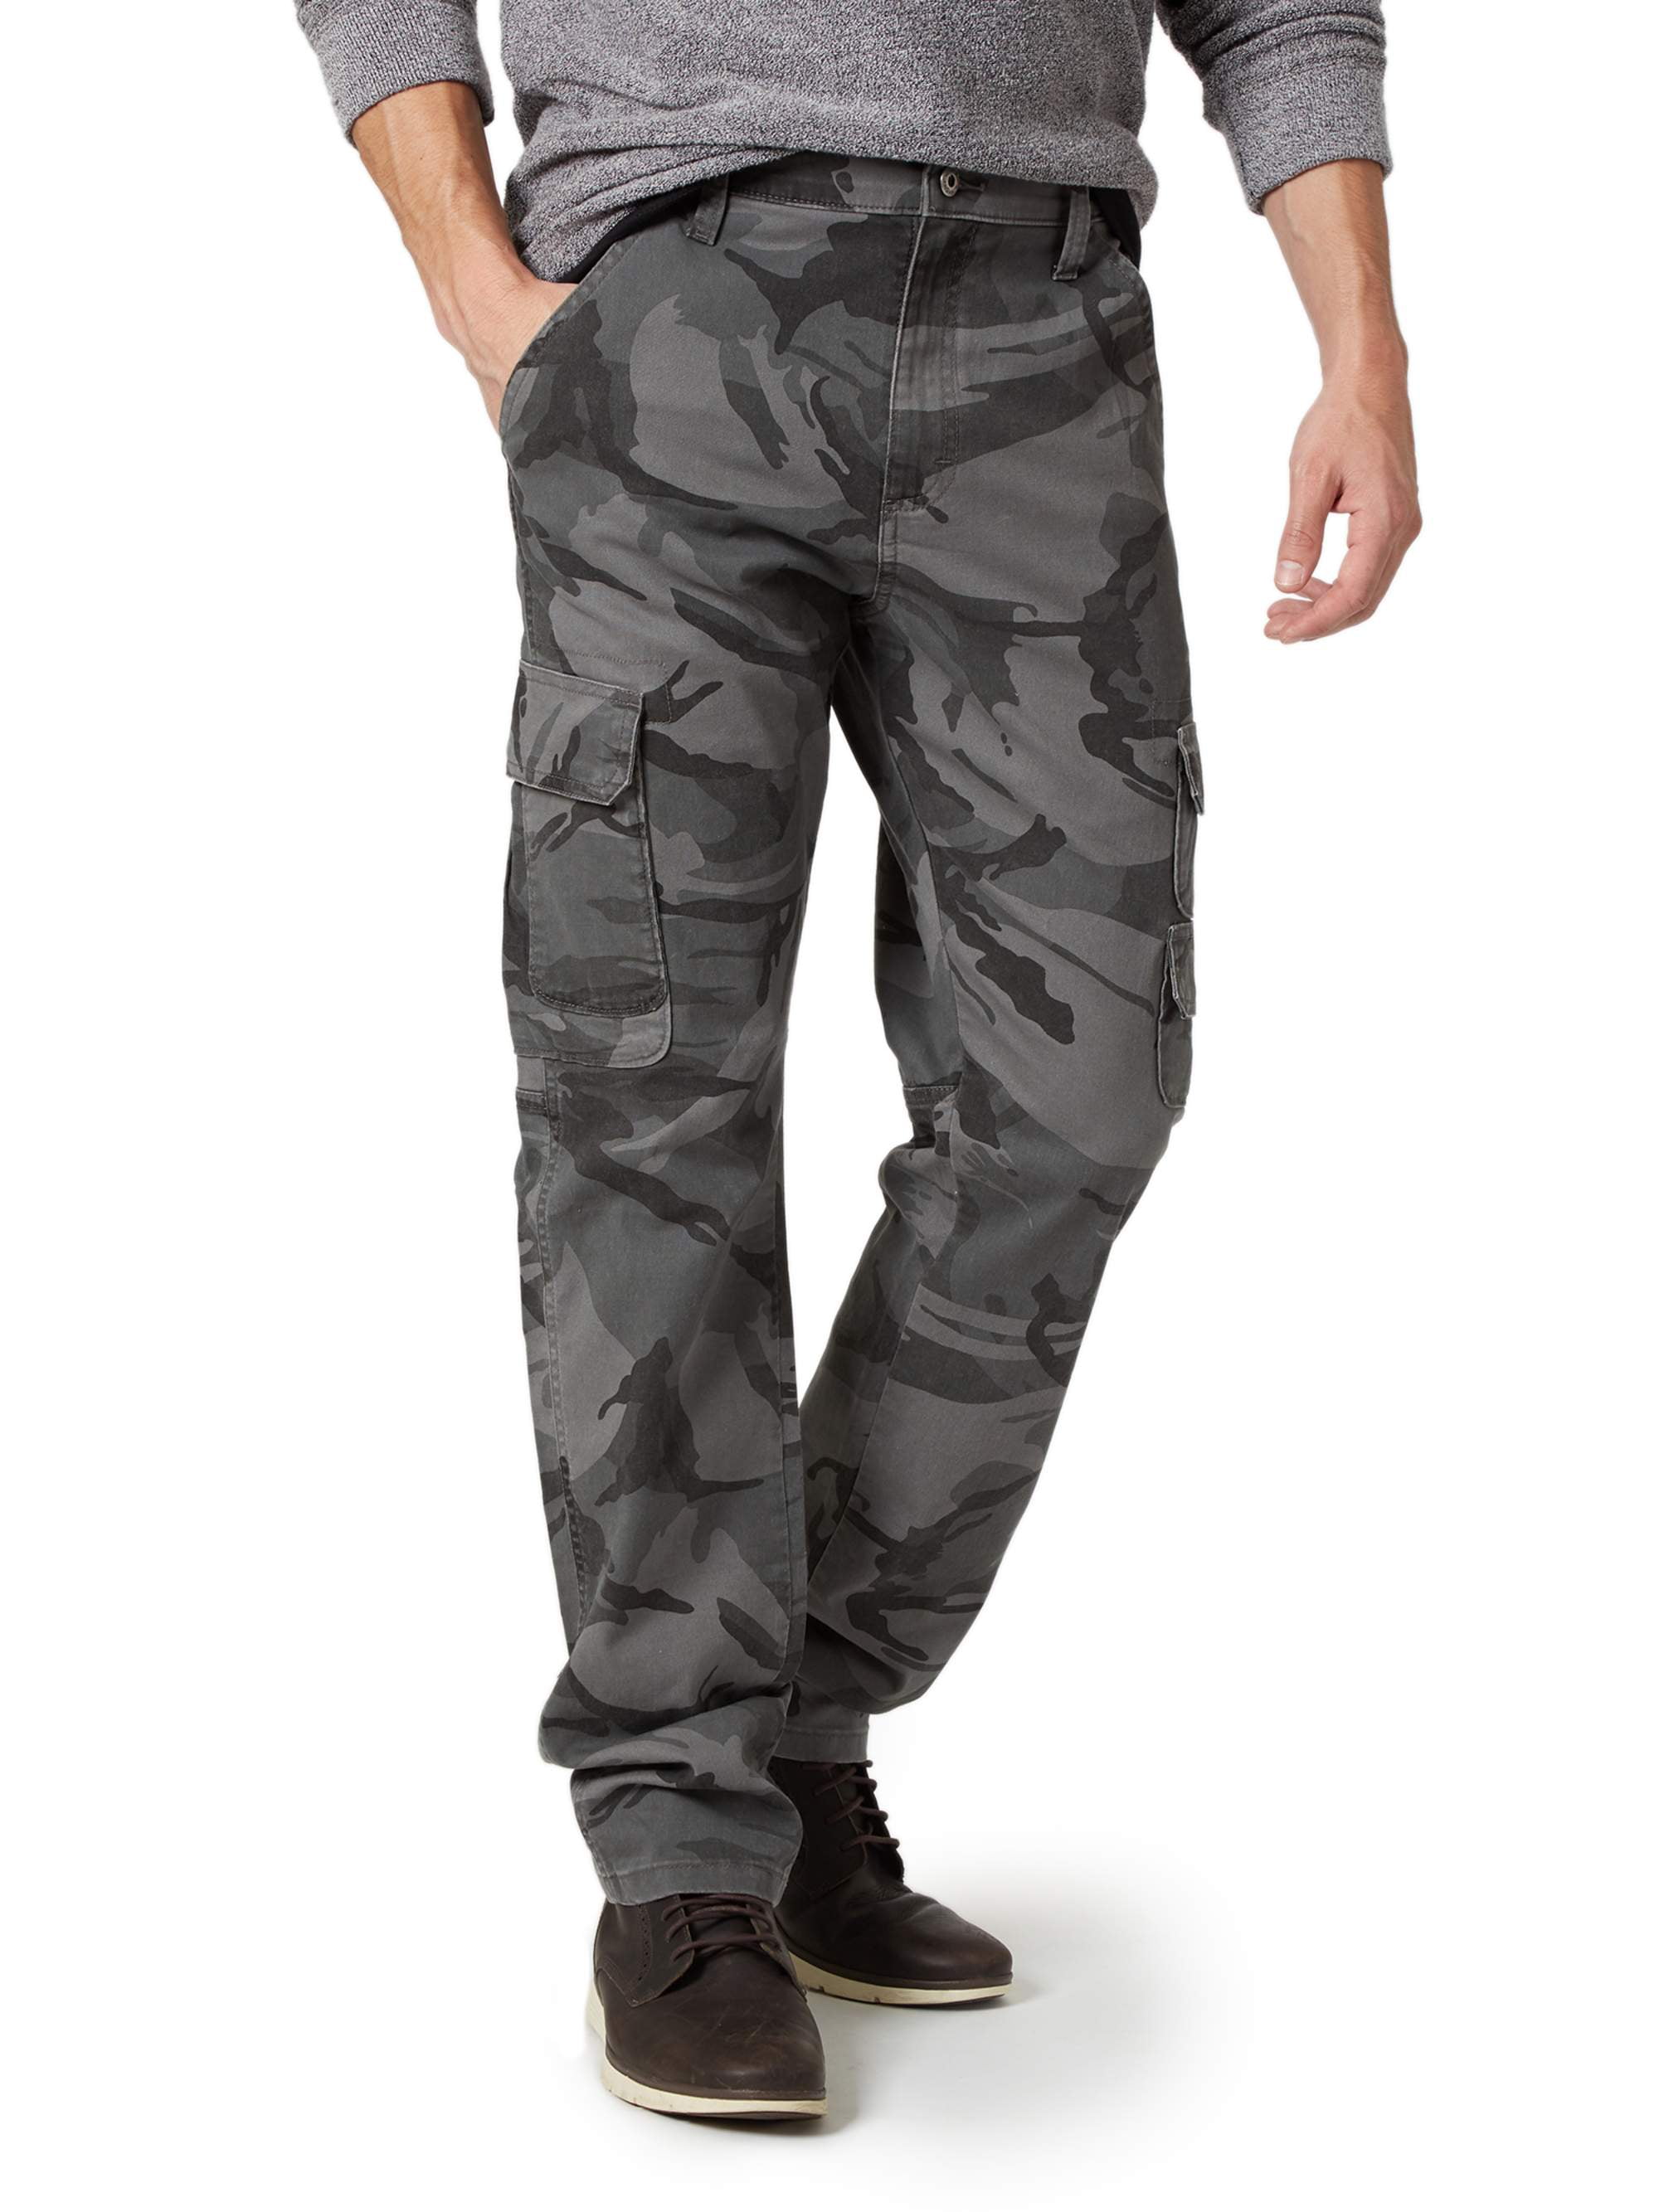 Goodfellow Co Relaxed Fit Striaght Green Stretch Camo Pants Men 30 32 34 36 38 